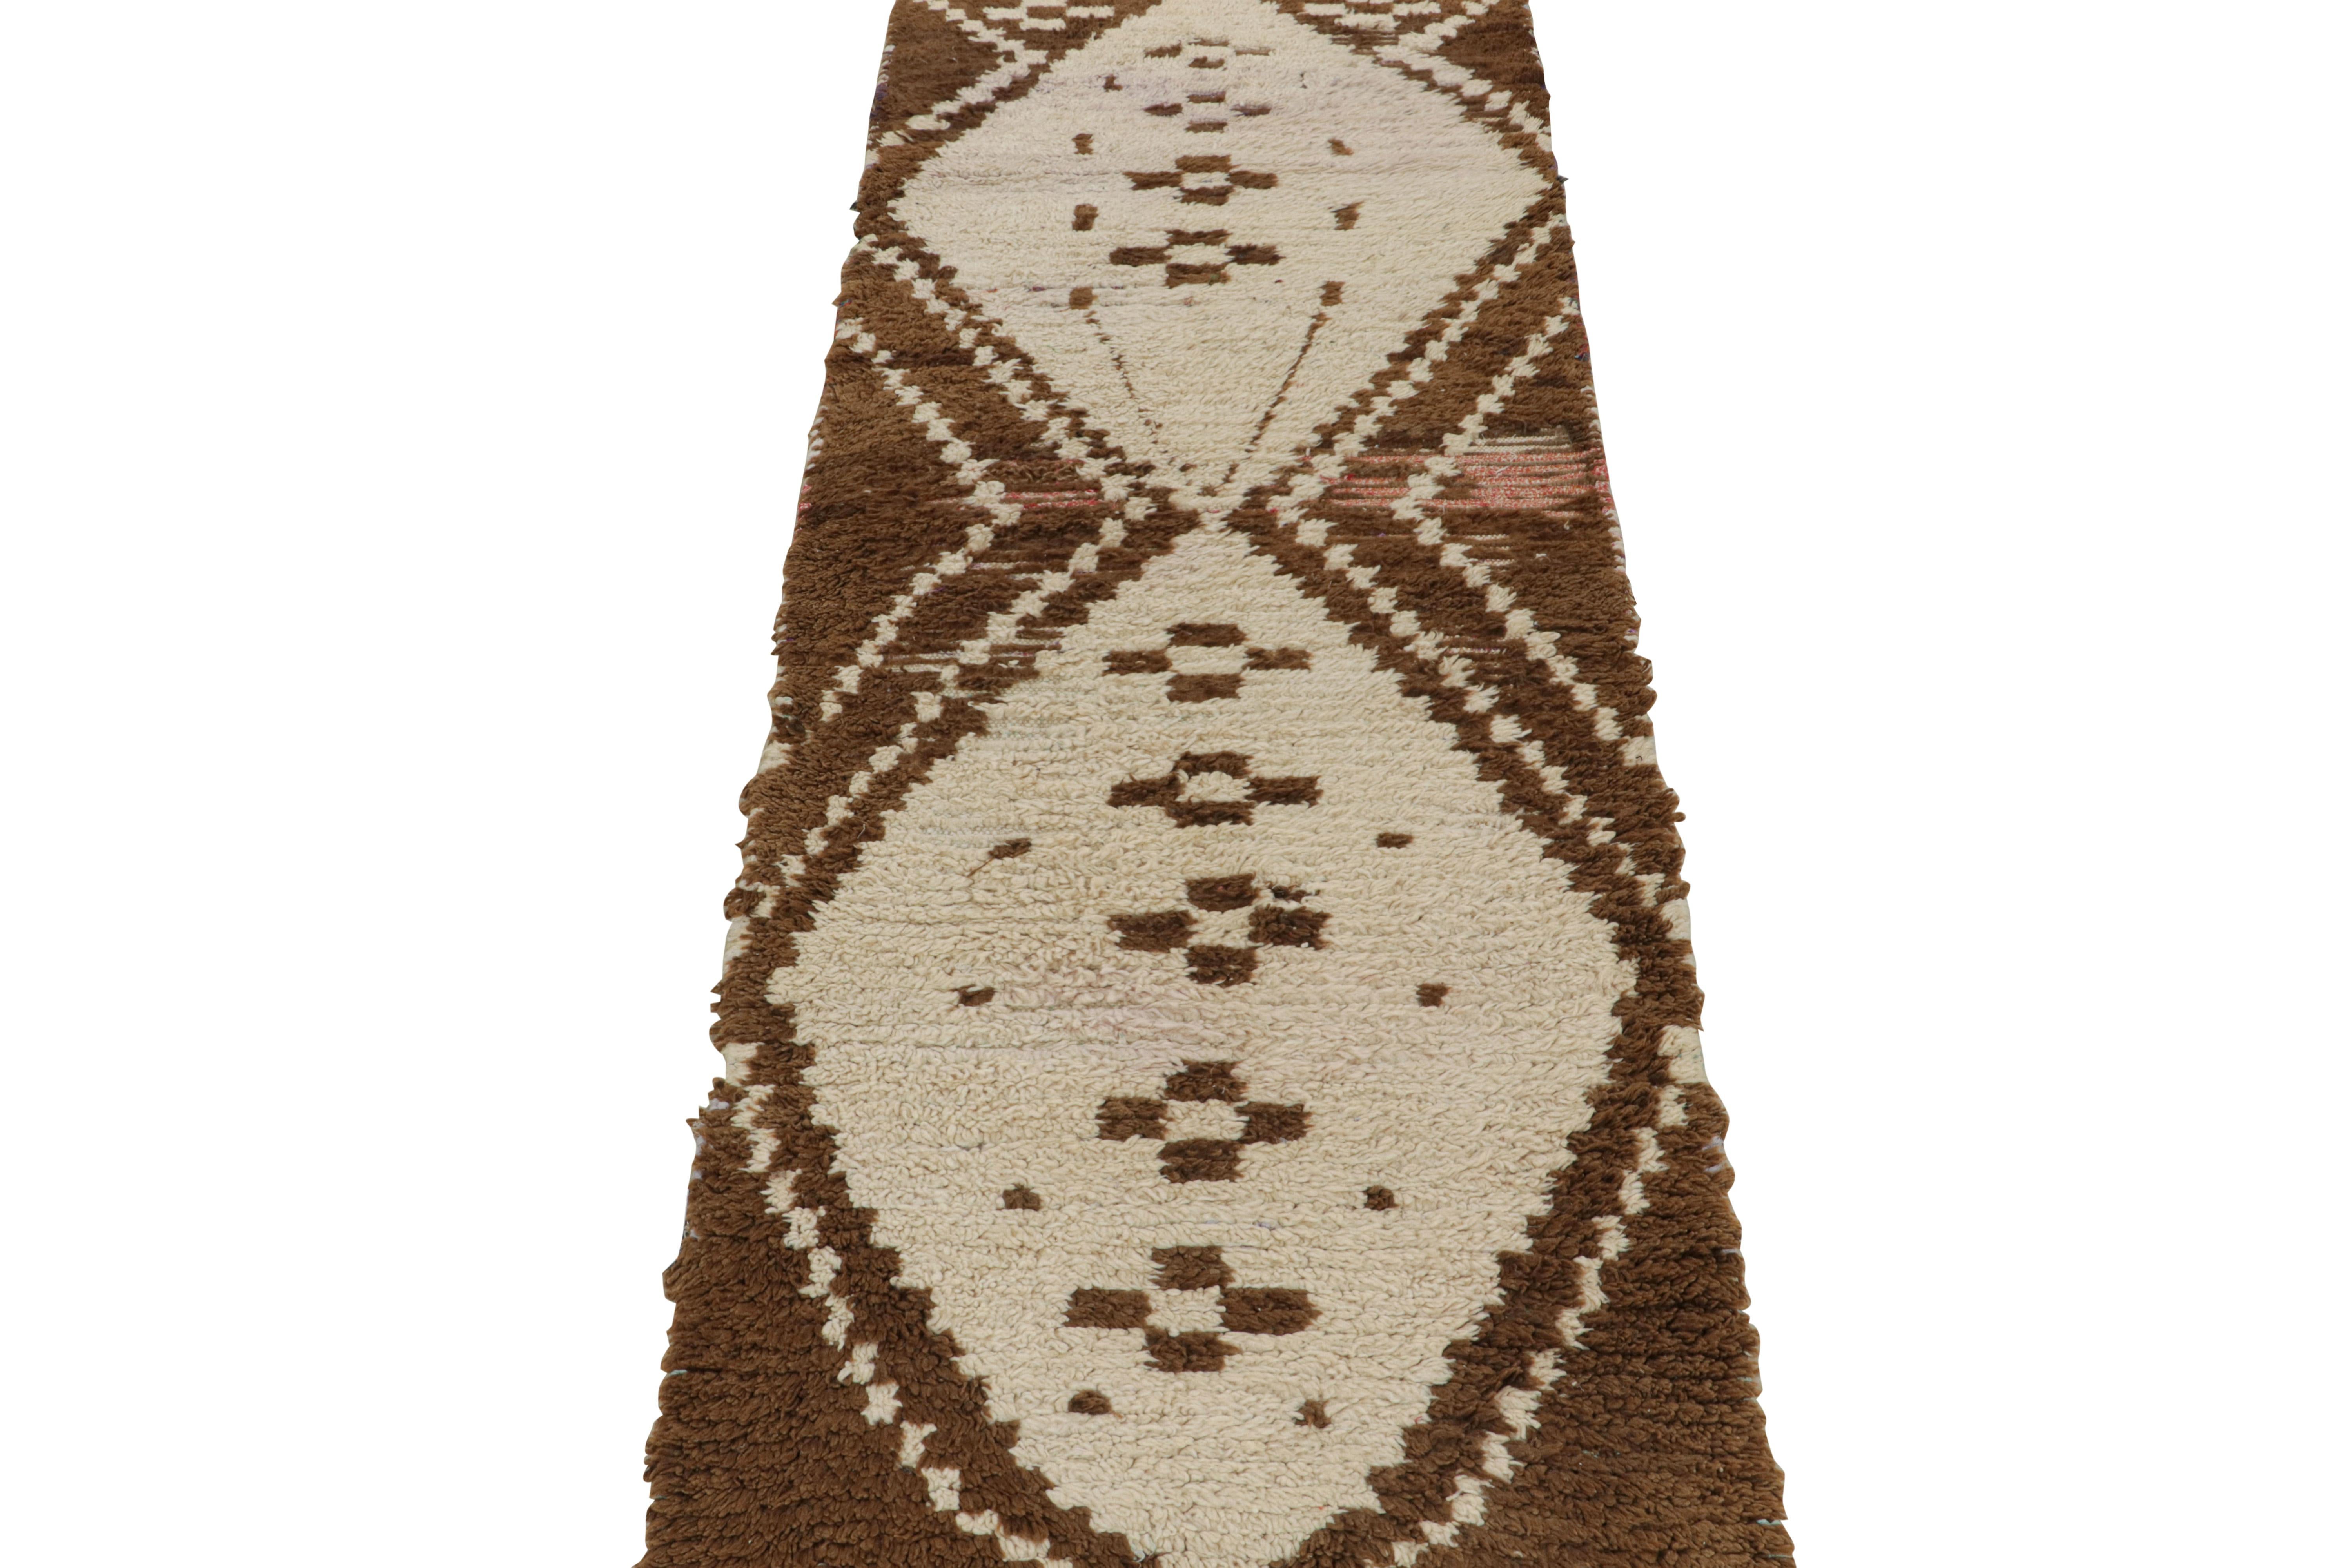 Hand-Woven 1950s Azilal Moroccan runner rug in Beige-Brown Tribal Patterns by Rug & Kilim For Sale